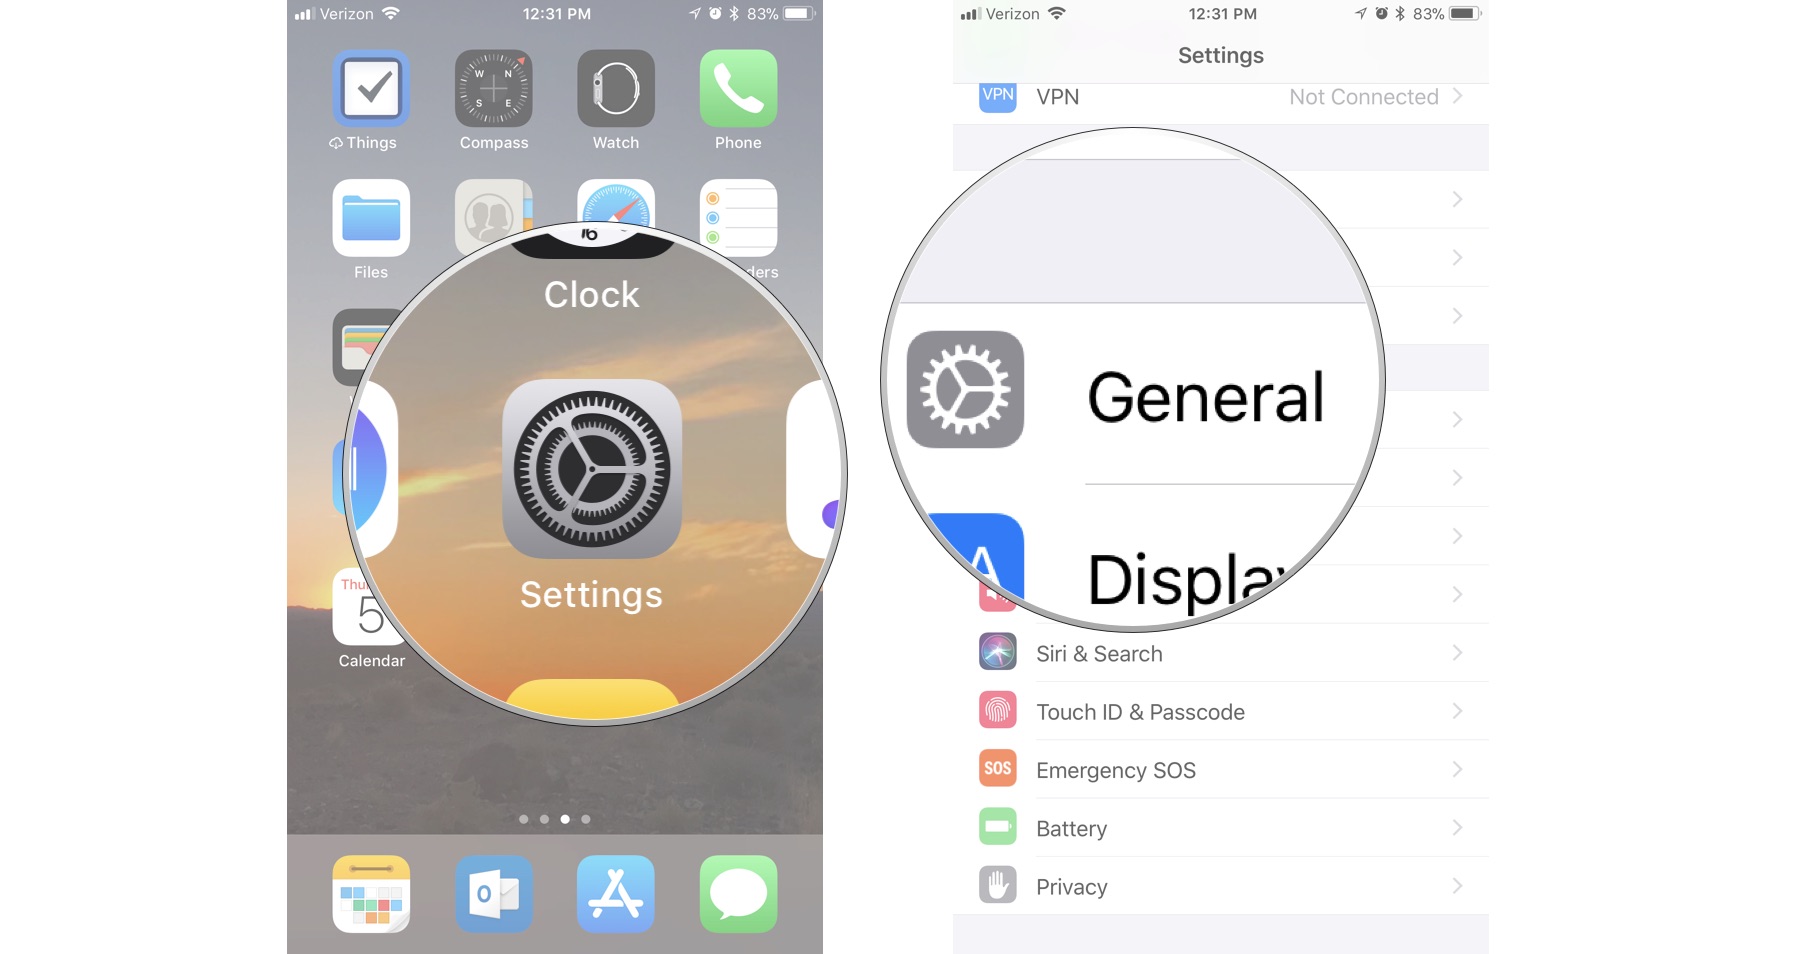 Find Serial number on iPhone: Launch Settings, then tap General